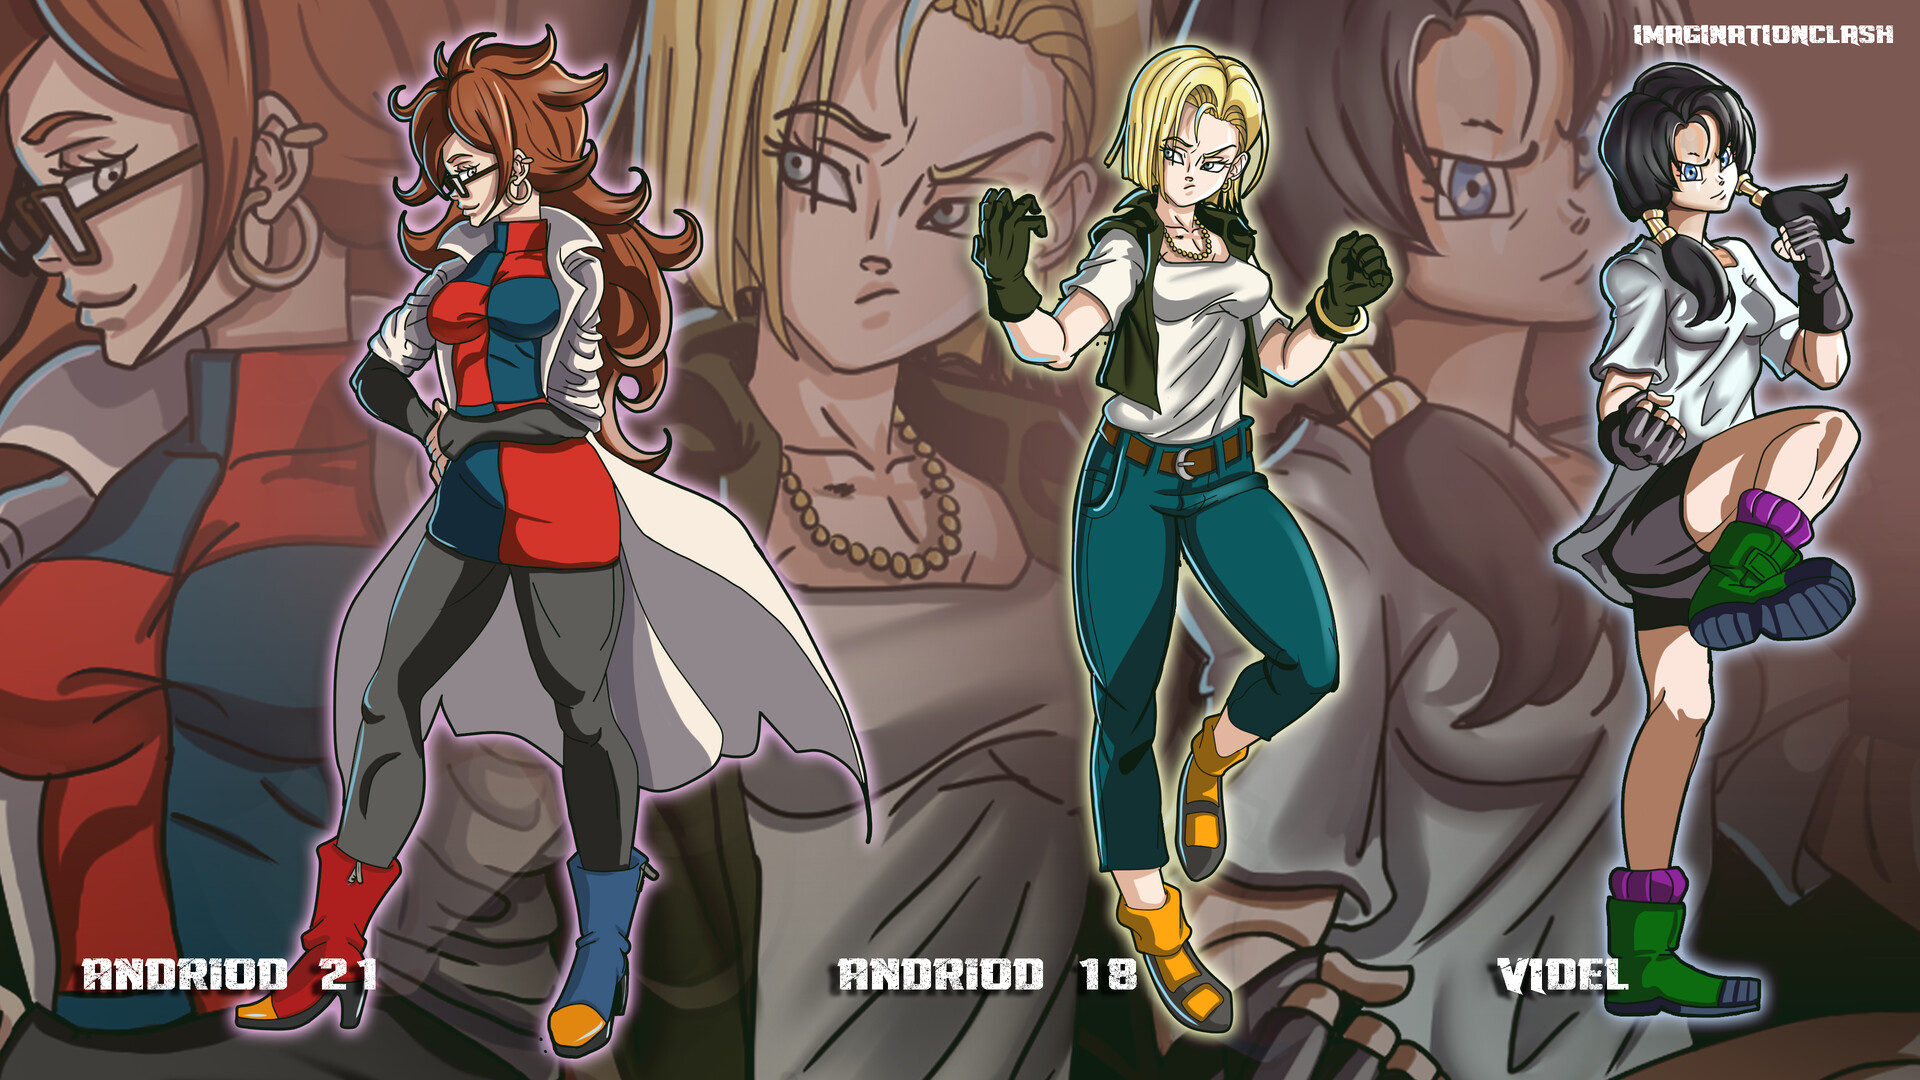 android 18 x videl naked